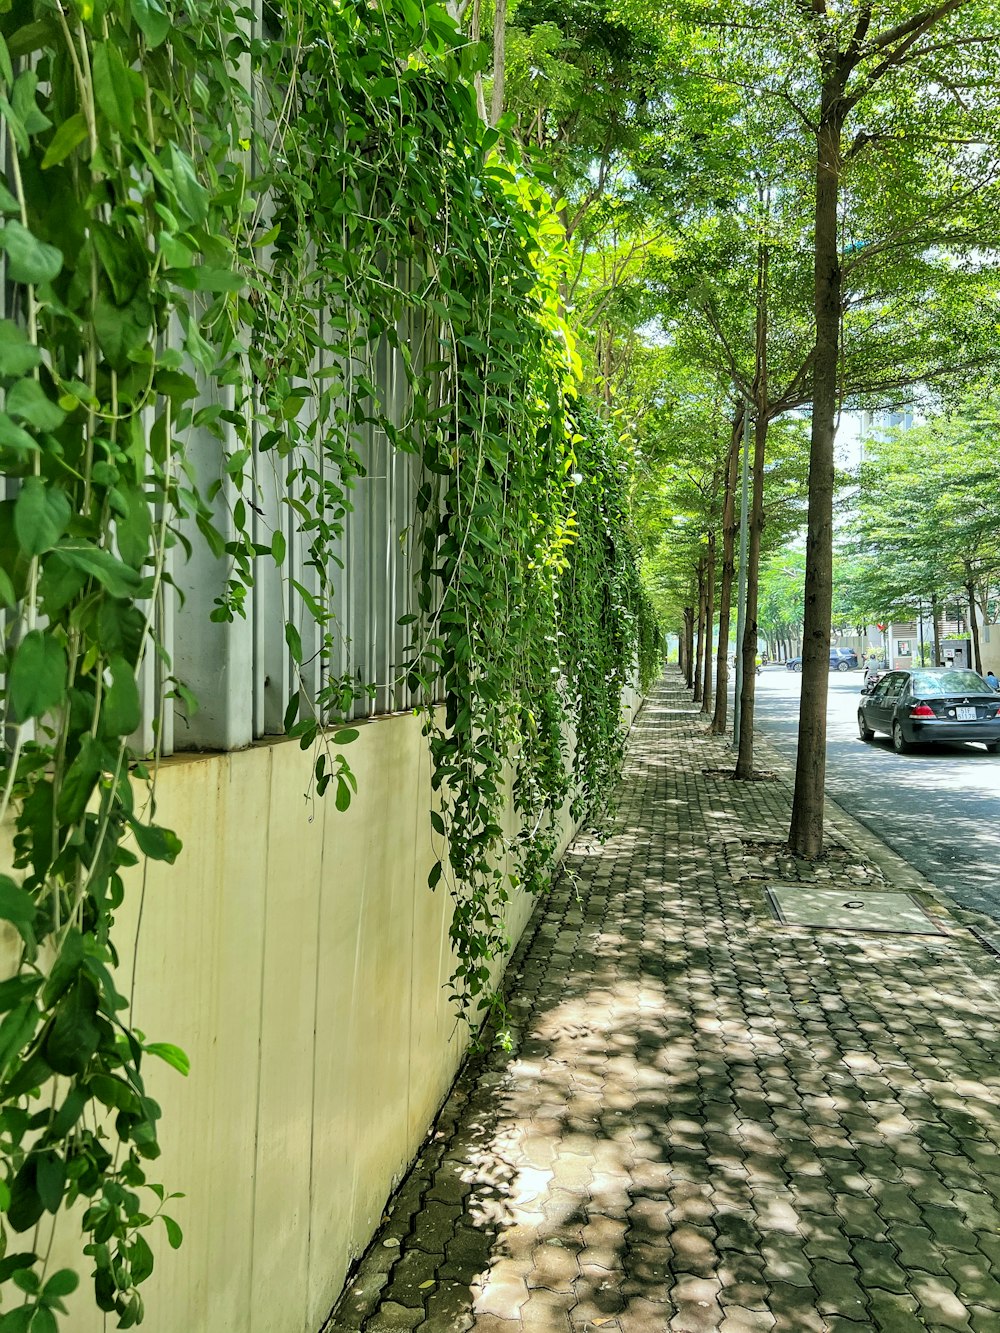 a wall with vines growing on it